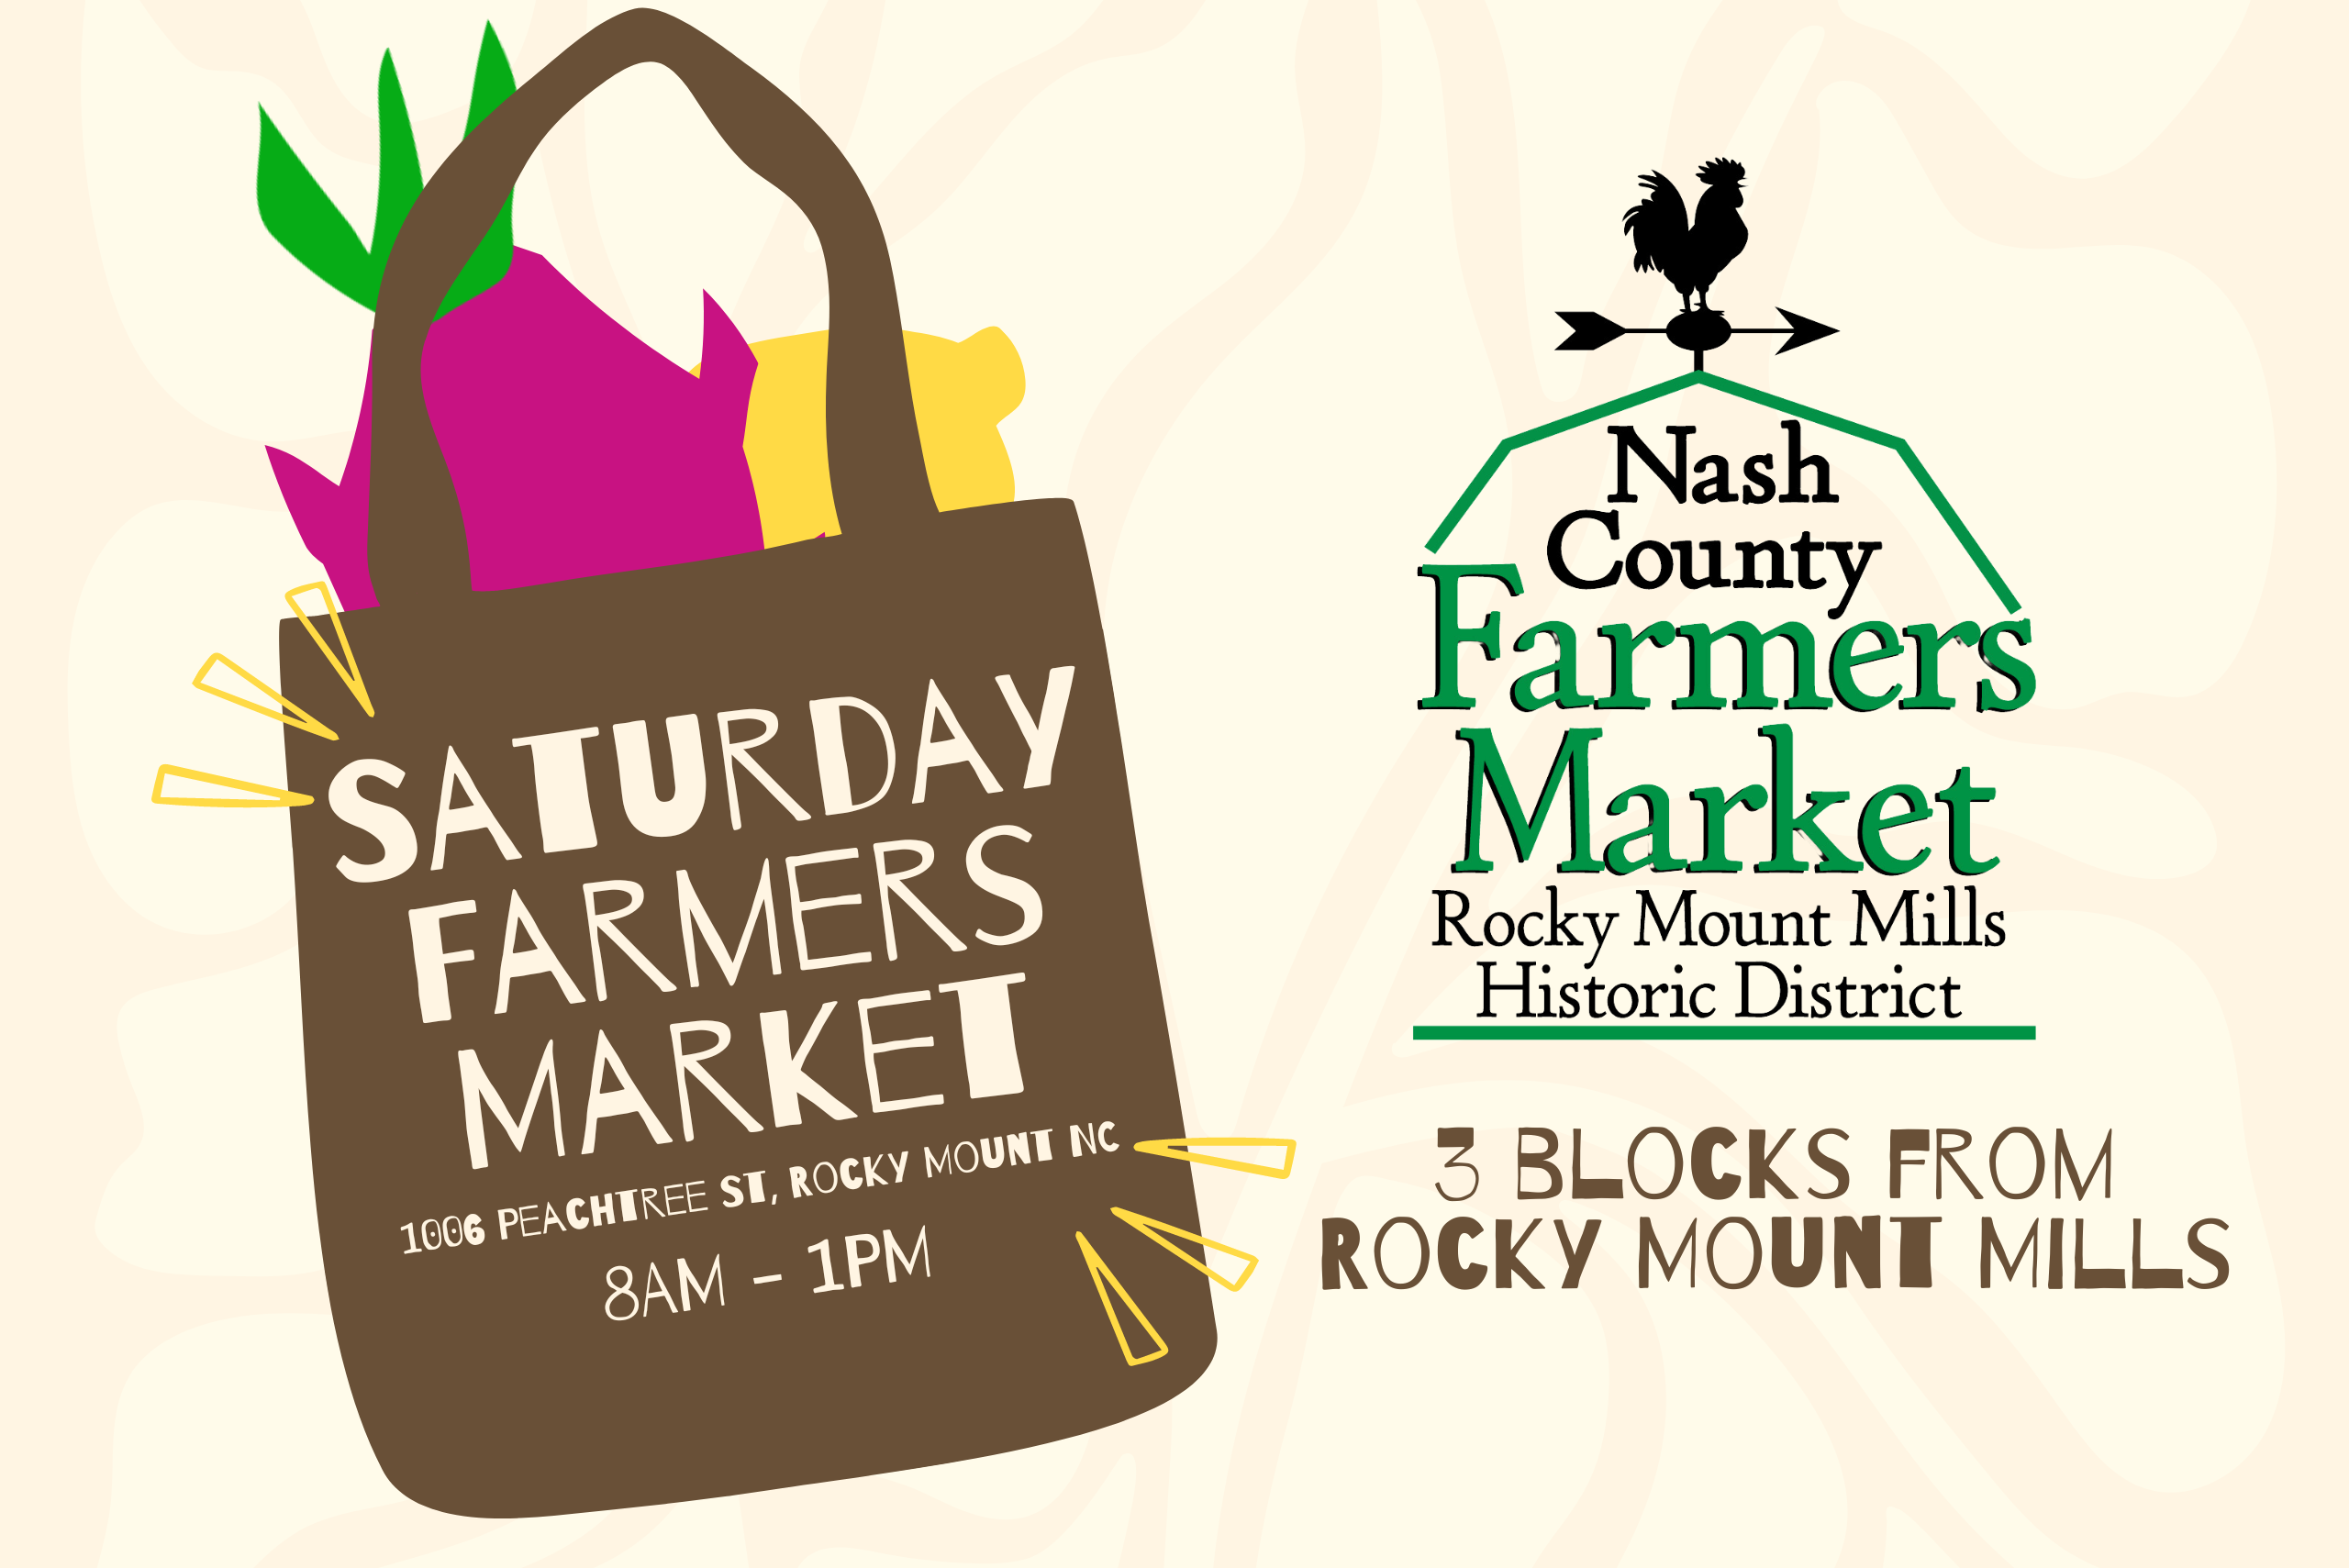 Father's Day Market - Nash County Farmers Market